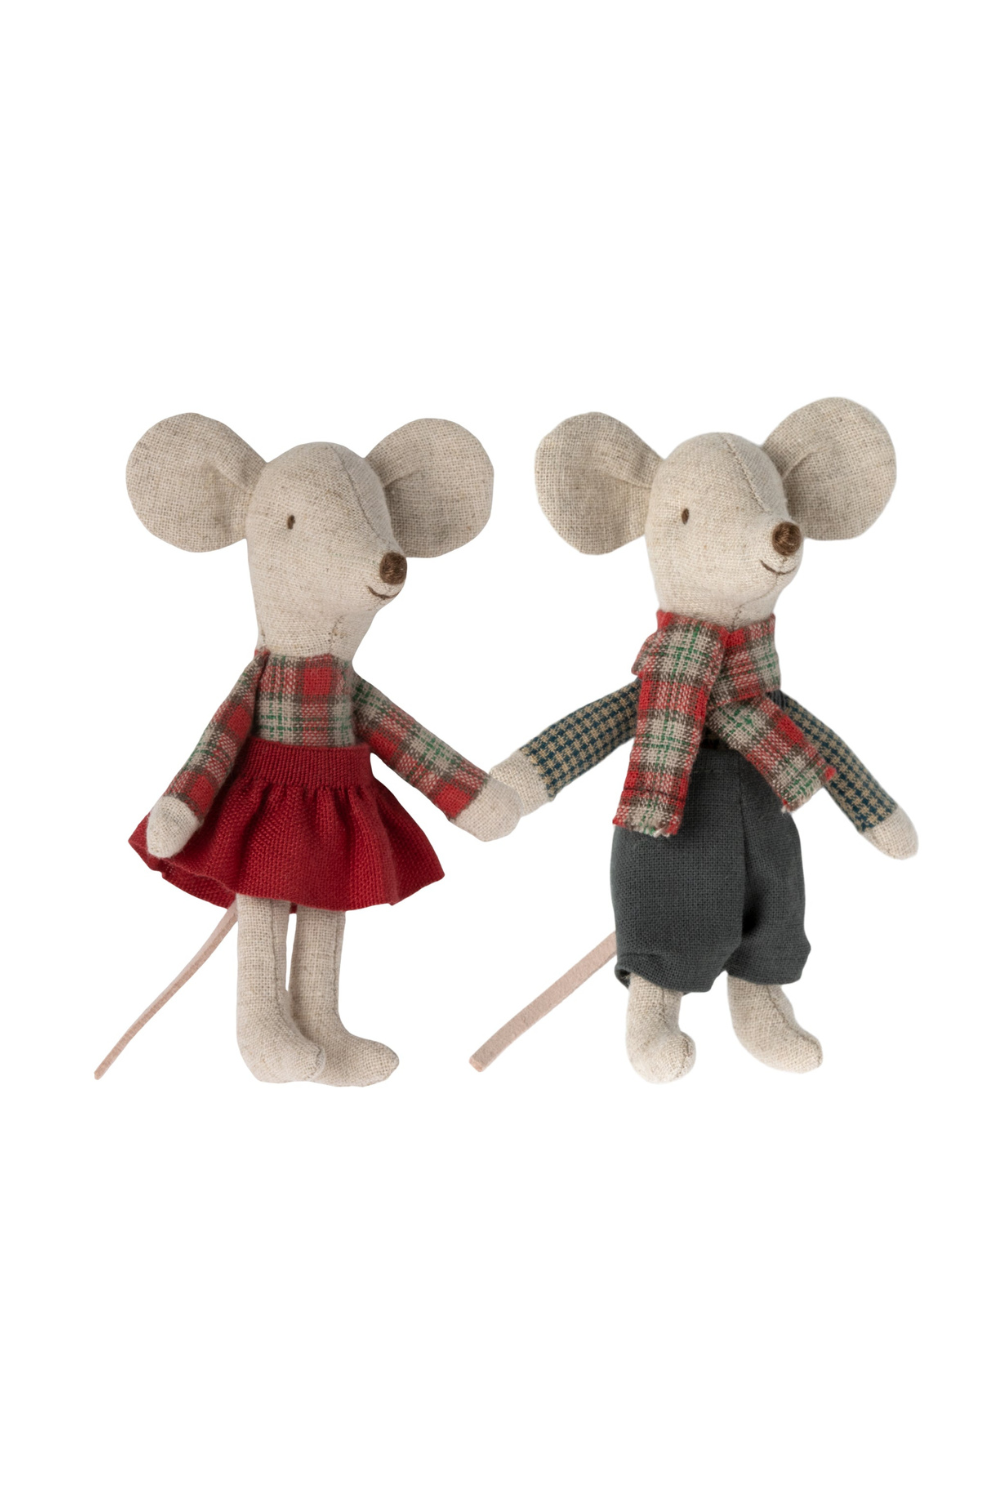 Winter Mice Twins: Little Brother & Sister Maileg Collectibles